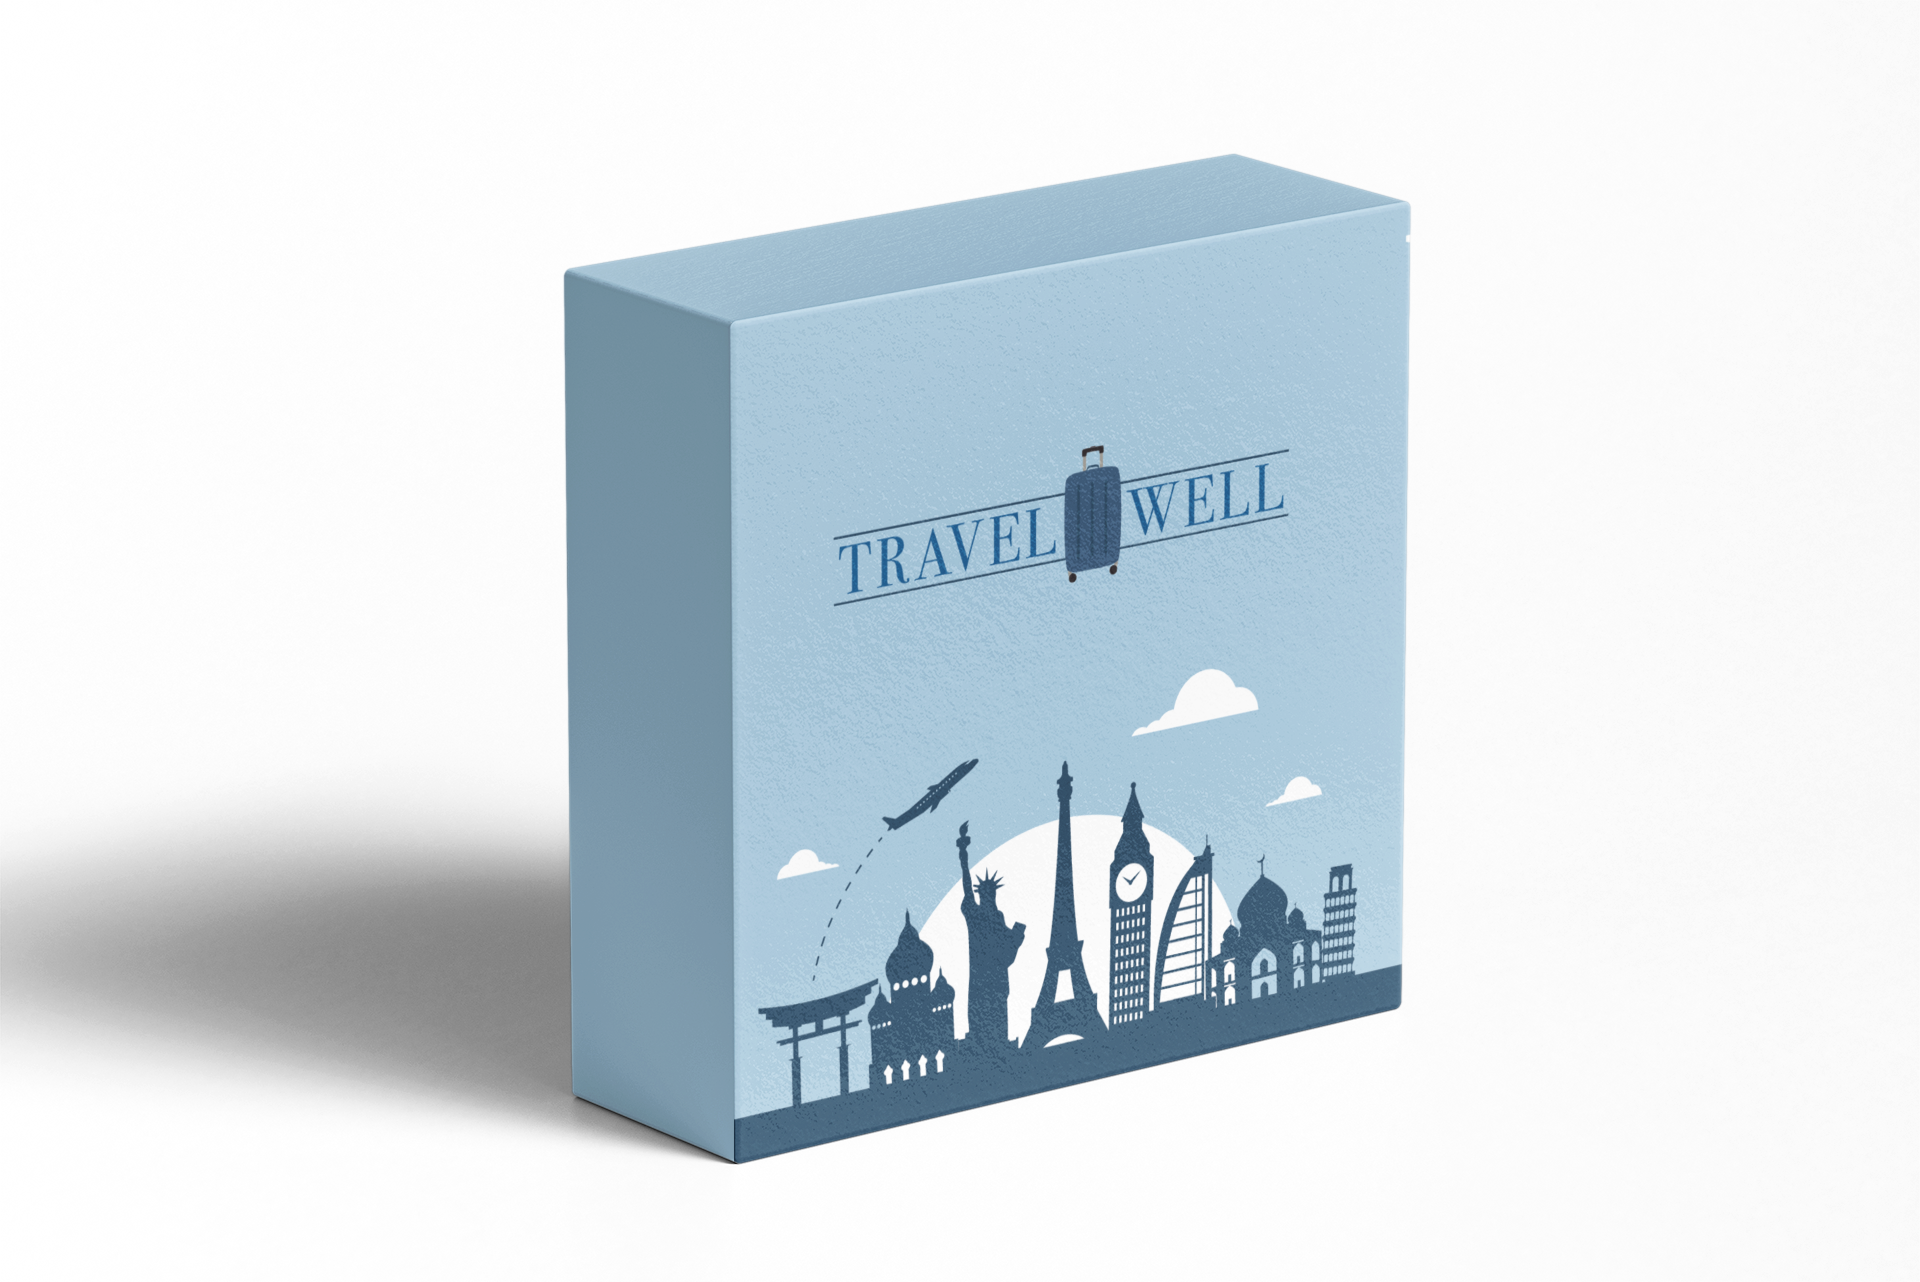 The Travel Well Box